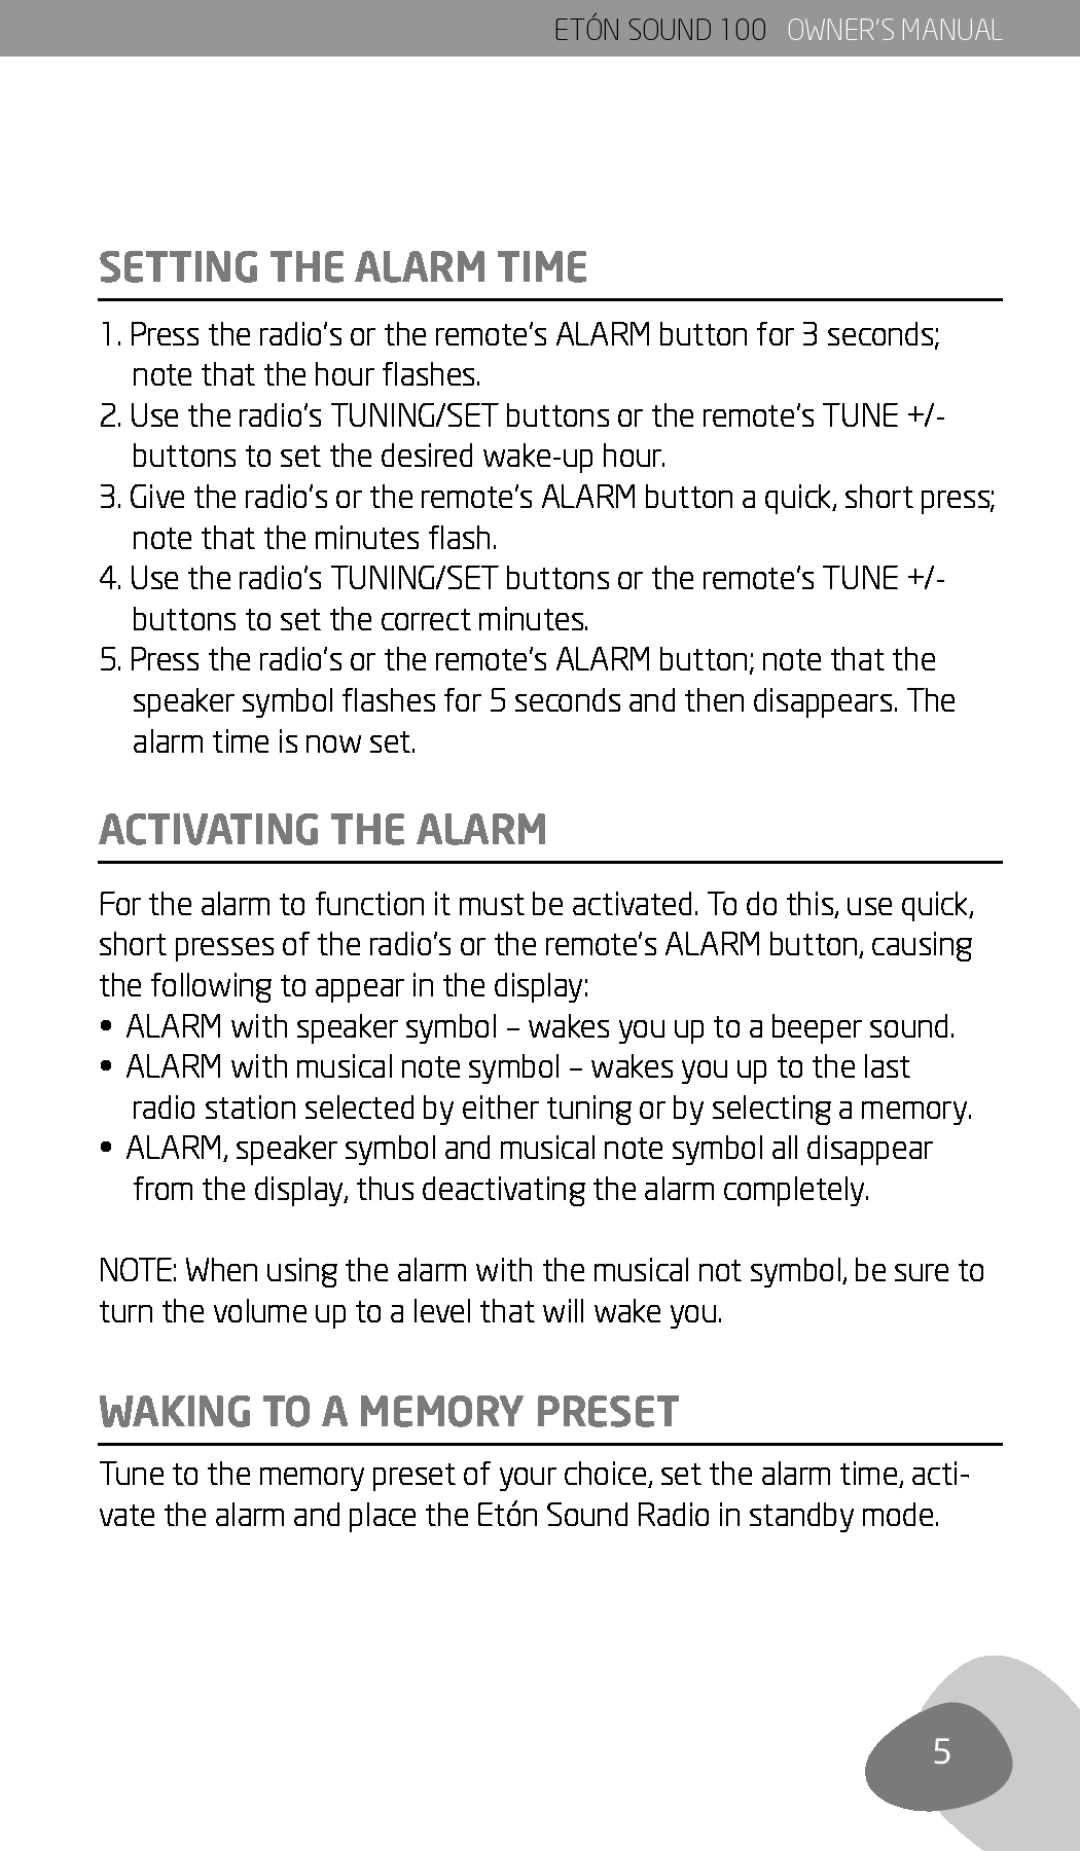 Eton Sound 100 owner manual Setting The Alarm Time, Activating The Alarm, Waking To A Memory Preset 